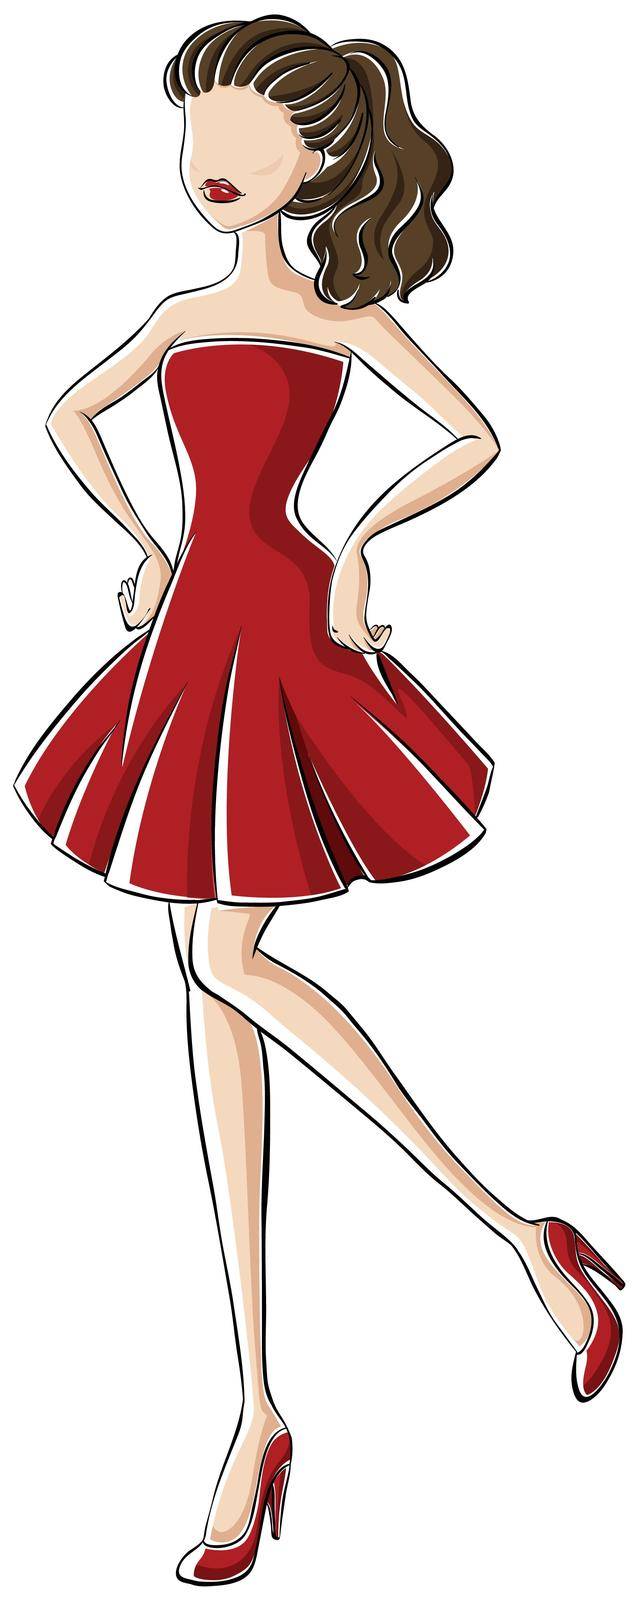 Sketch of a woman in party wear red dress